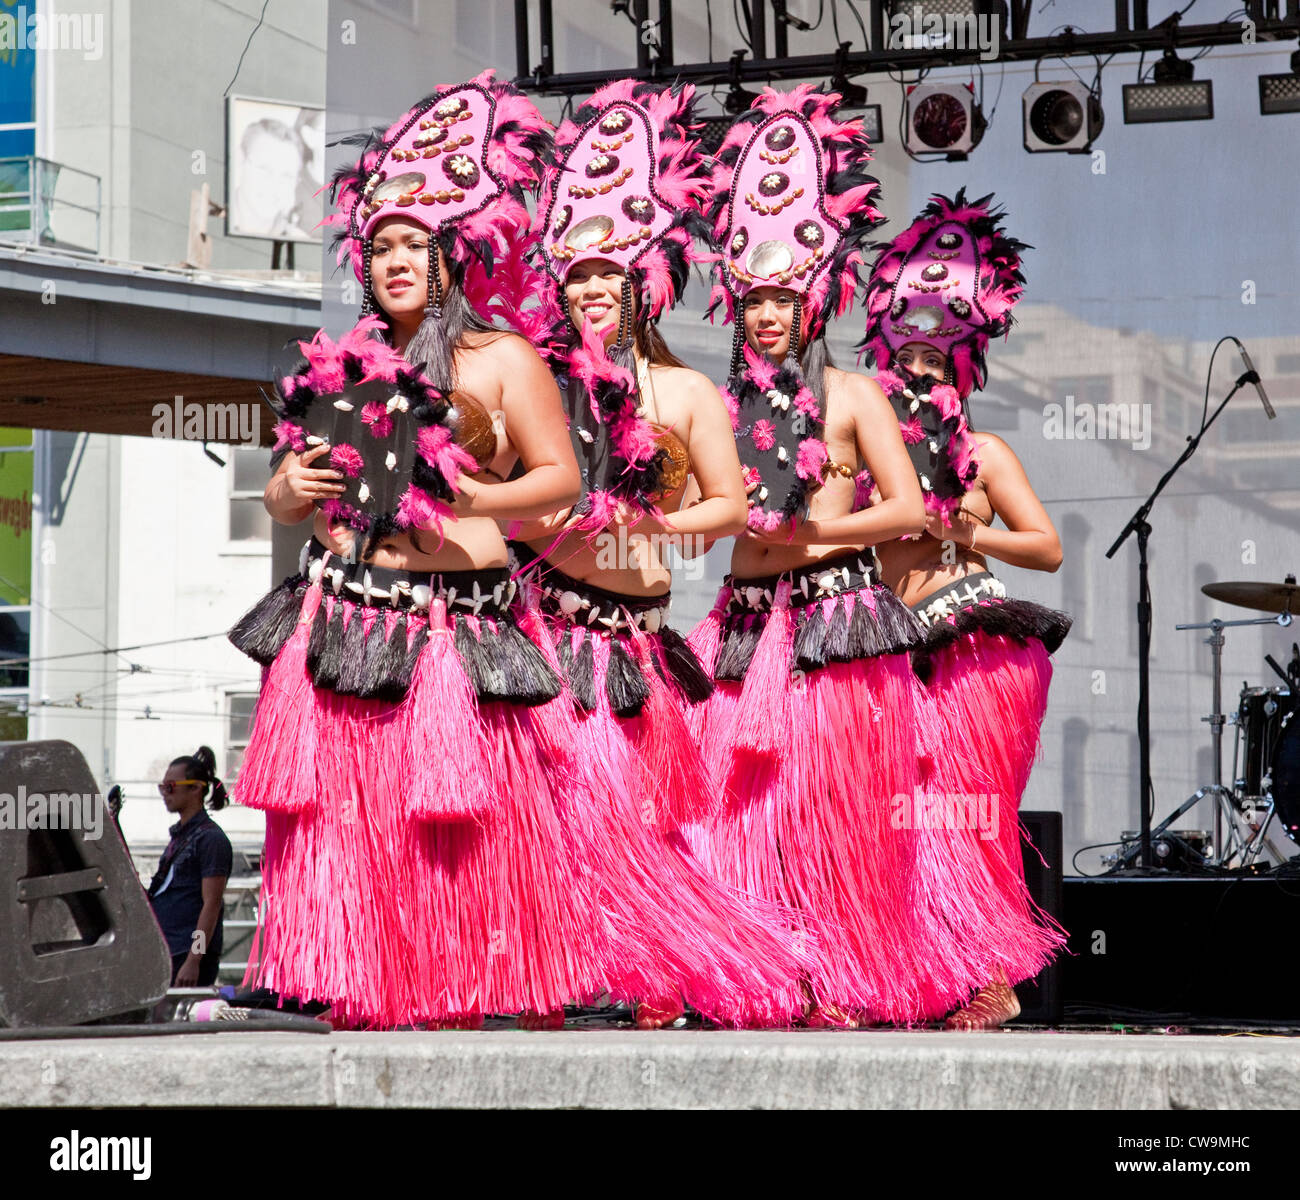 Hiawiaian Pacific Dancer performing at Yonge and Dundas Square in downtown Toronto;Ontario;Canada Stock Photo